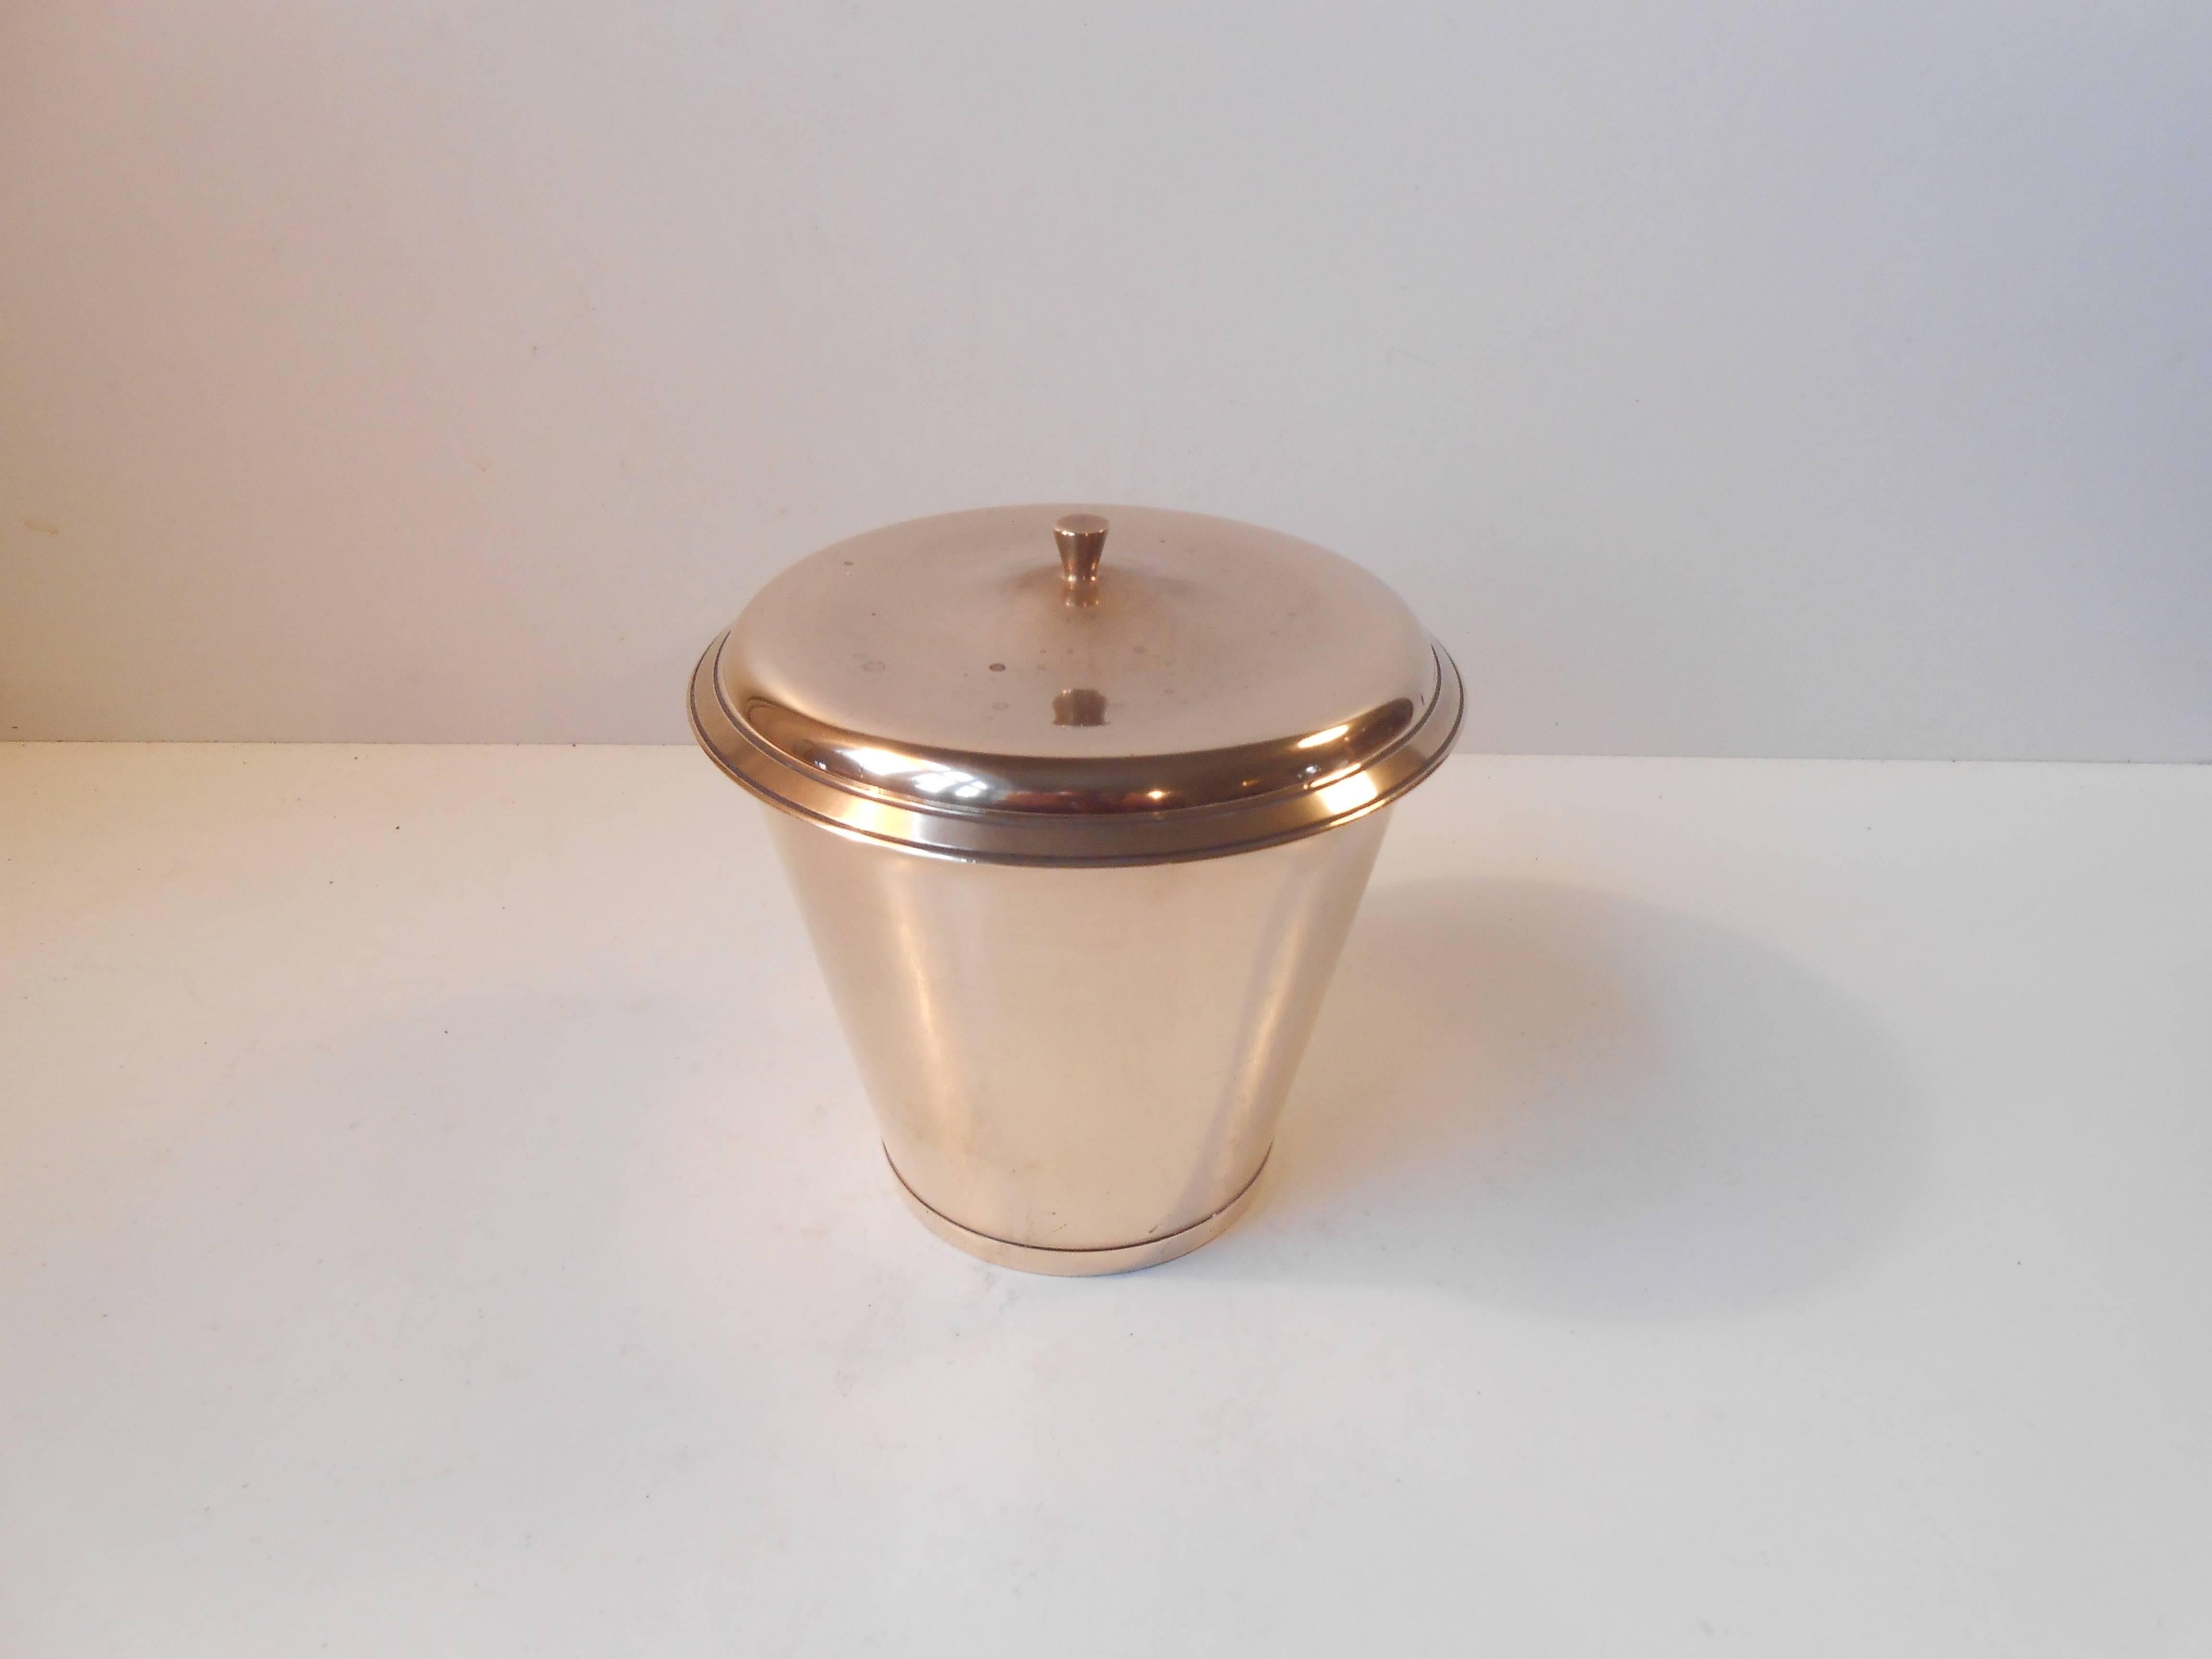 Beautiful lidded jar in solid bronze with pure and simple Art Deco lines and organically shaped lid. Manufactured and designed by Leon Hatot, ATO in France during the 1930s. It is stamped ATO, Bronce.
Hatot and his company ATO are mostly known for